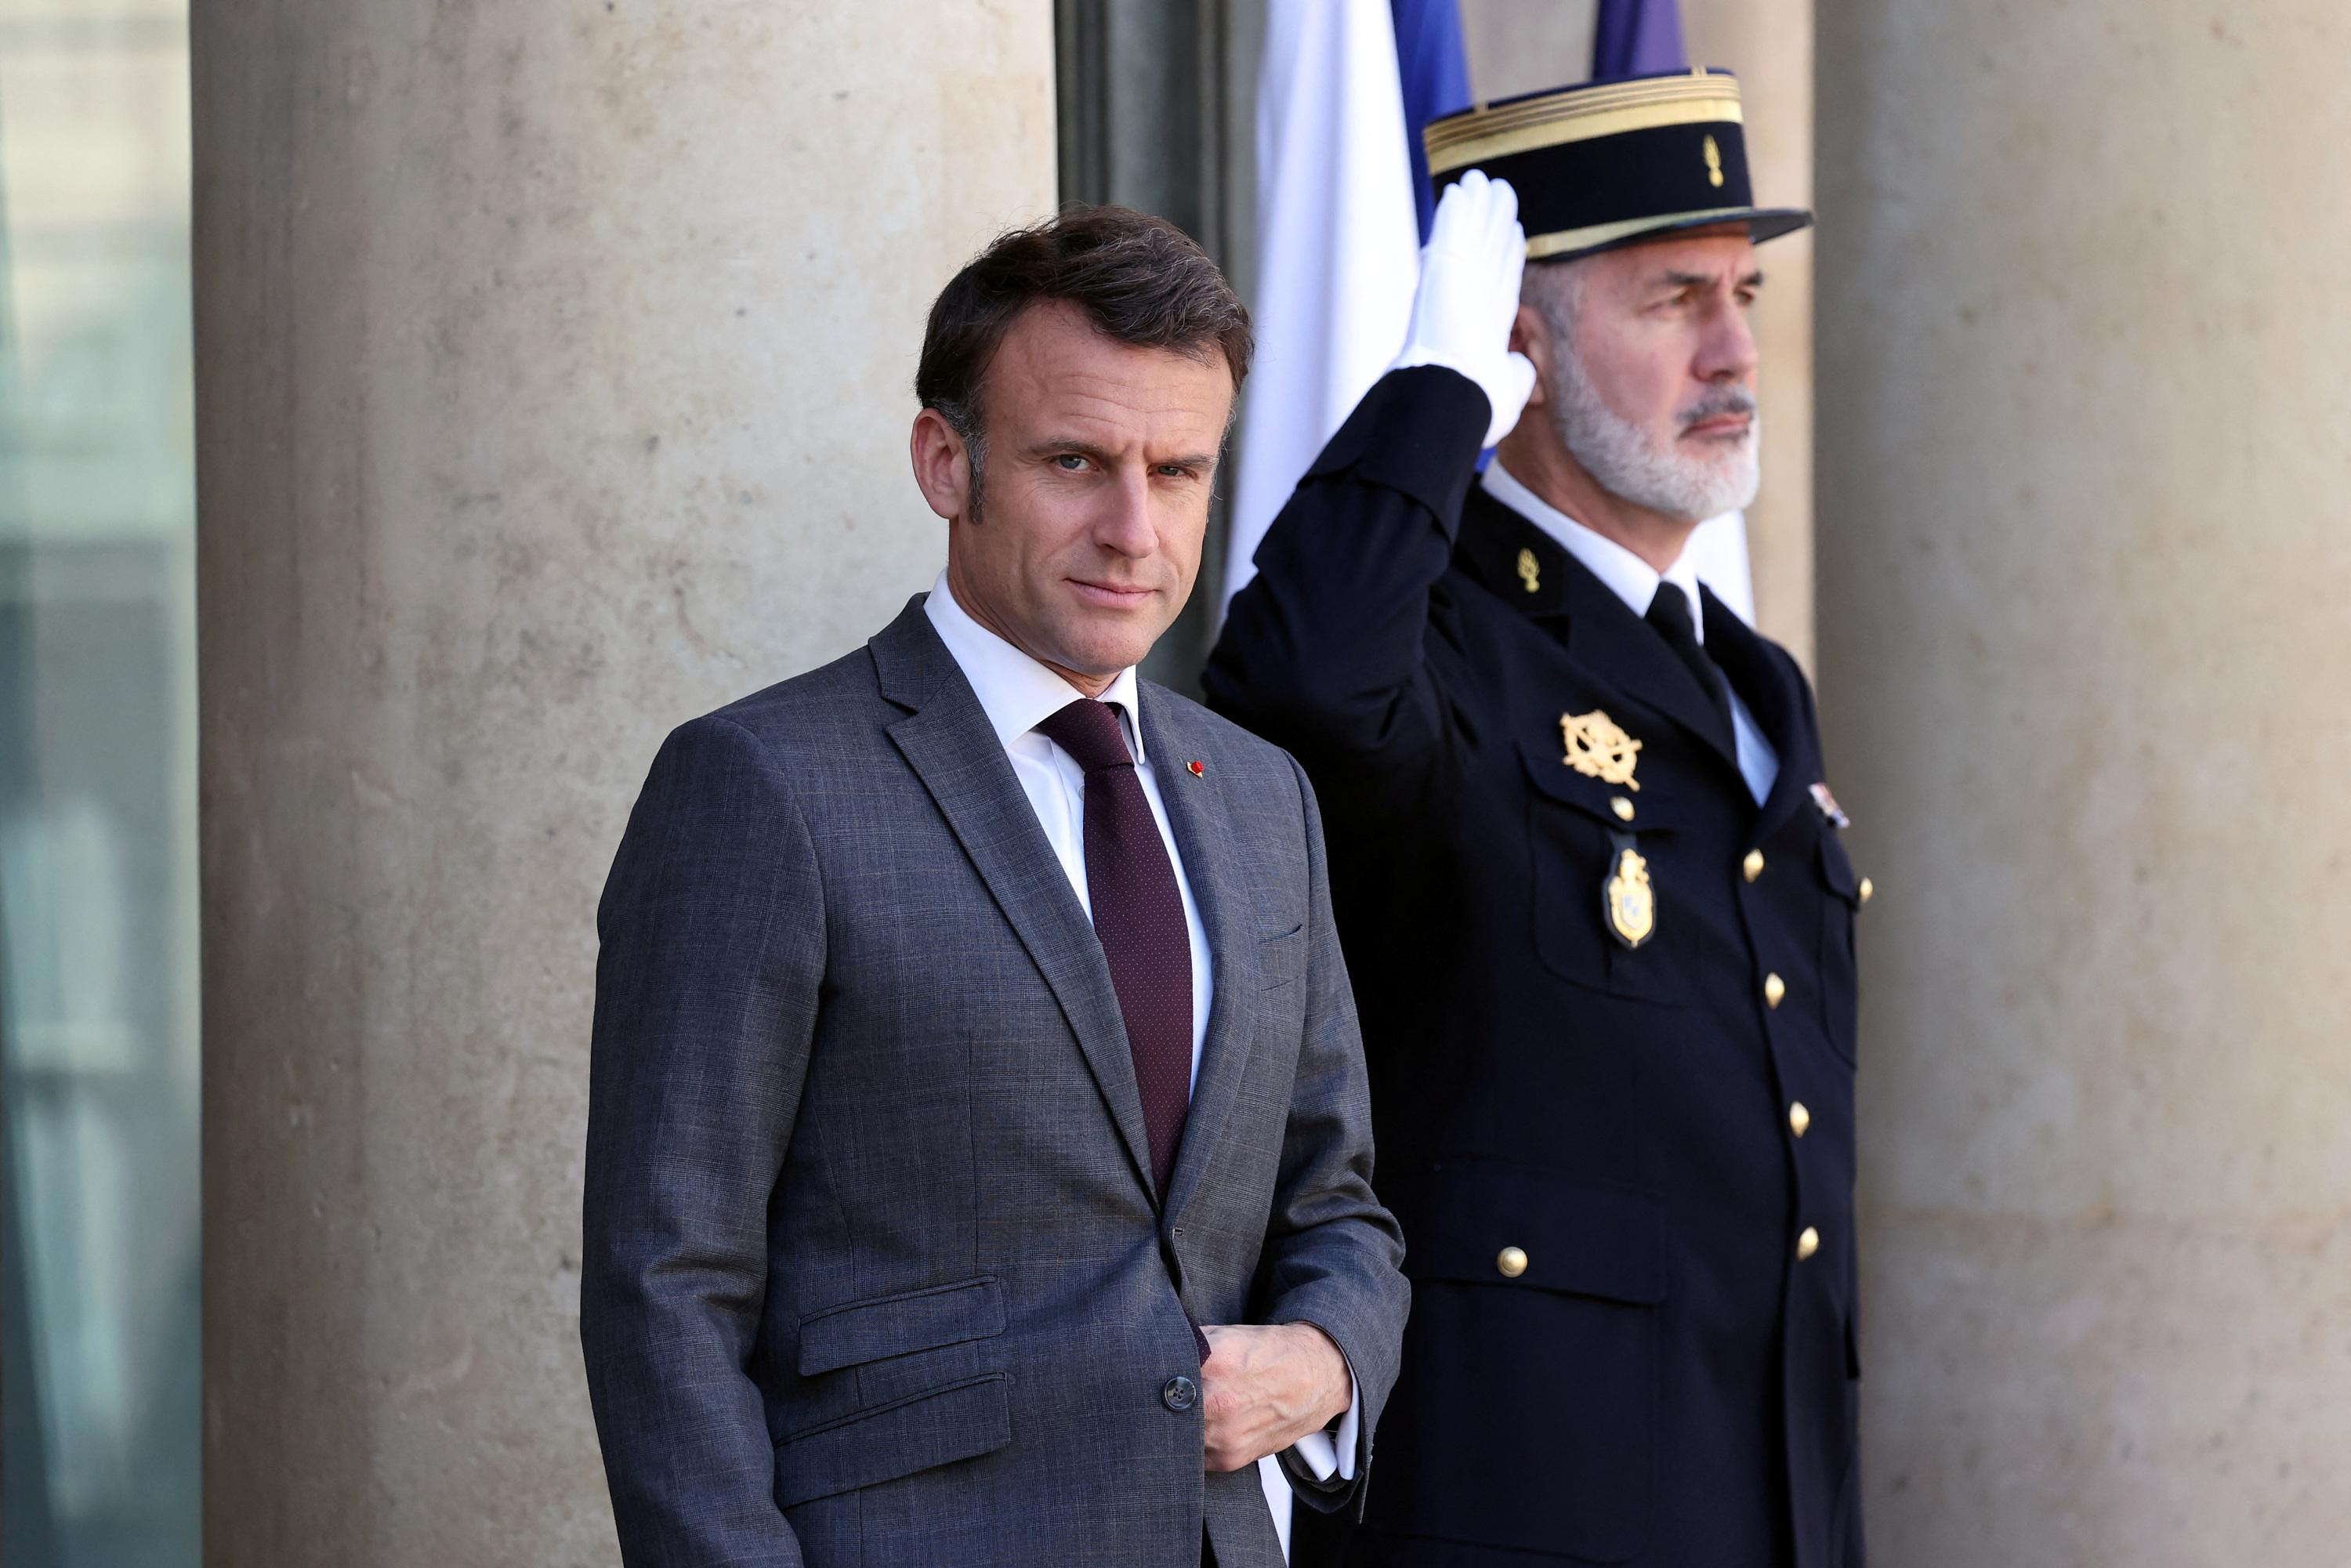 Threat of strikes for the 2024 Olympics: Macron says he has “confidence” in the “spirit of responsibility” of the unions